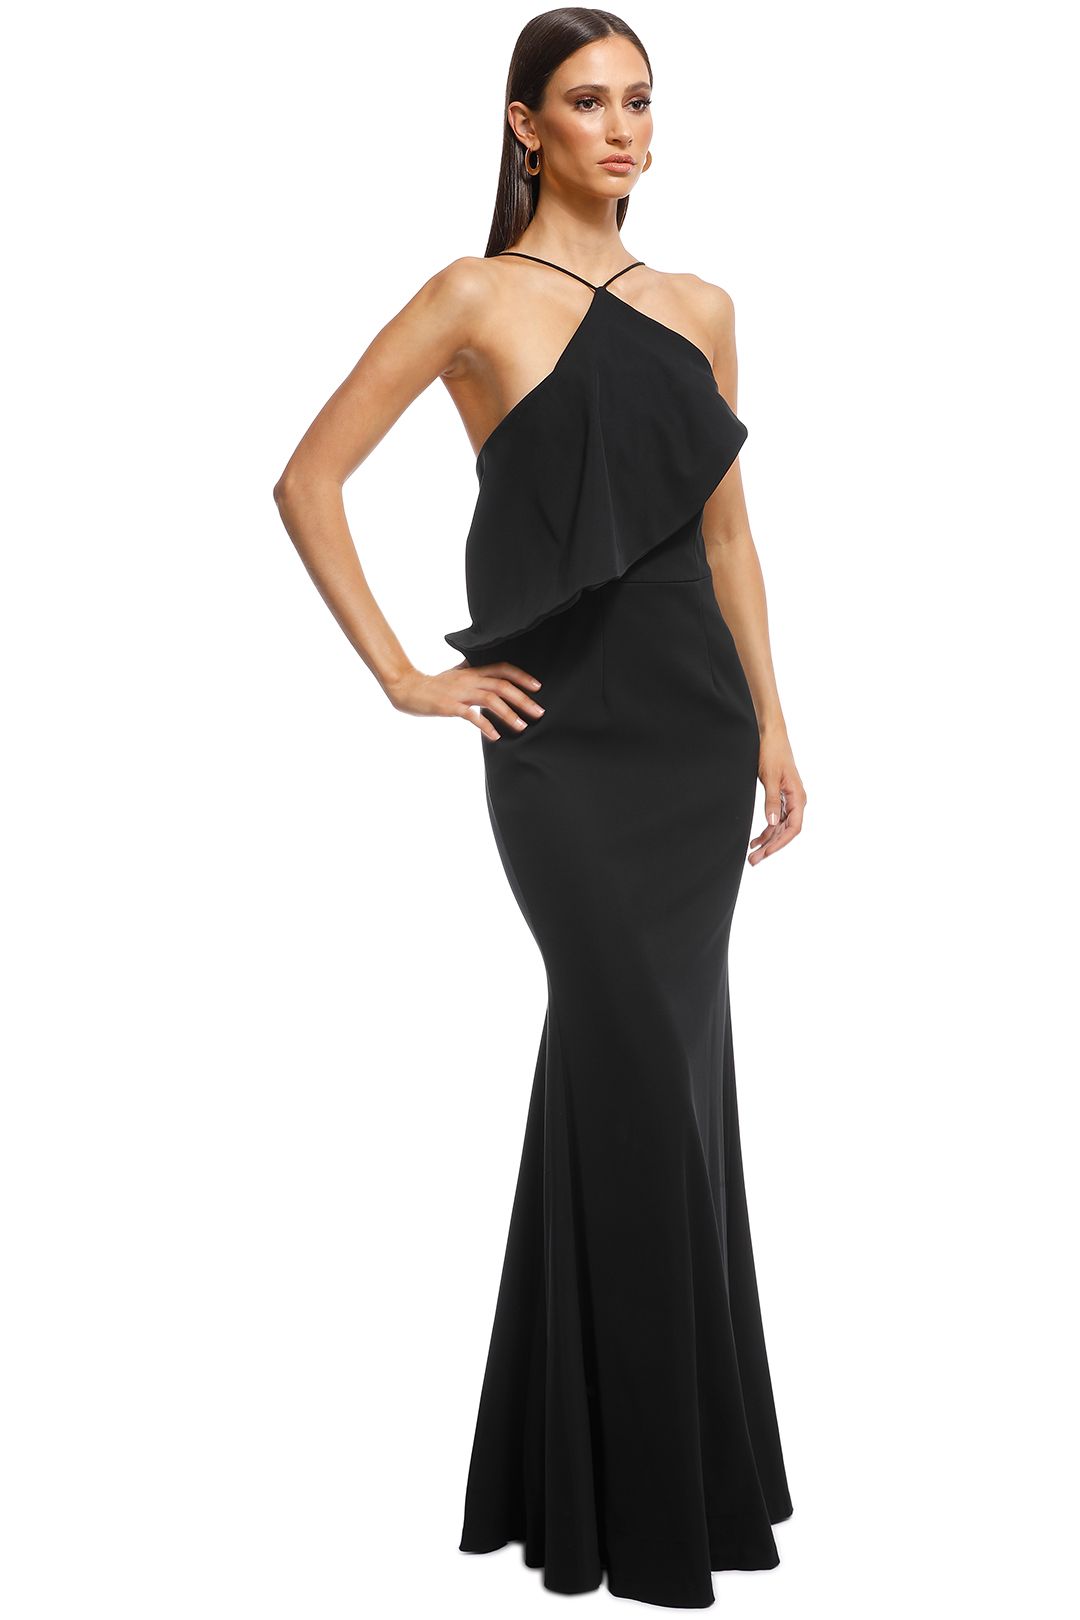 Talulah - After The Storm Gown - Black - Side